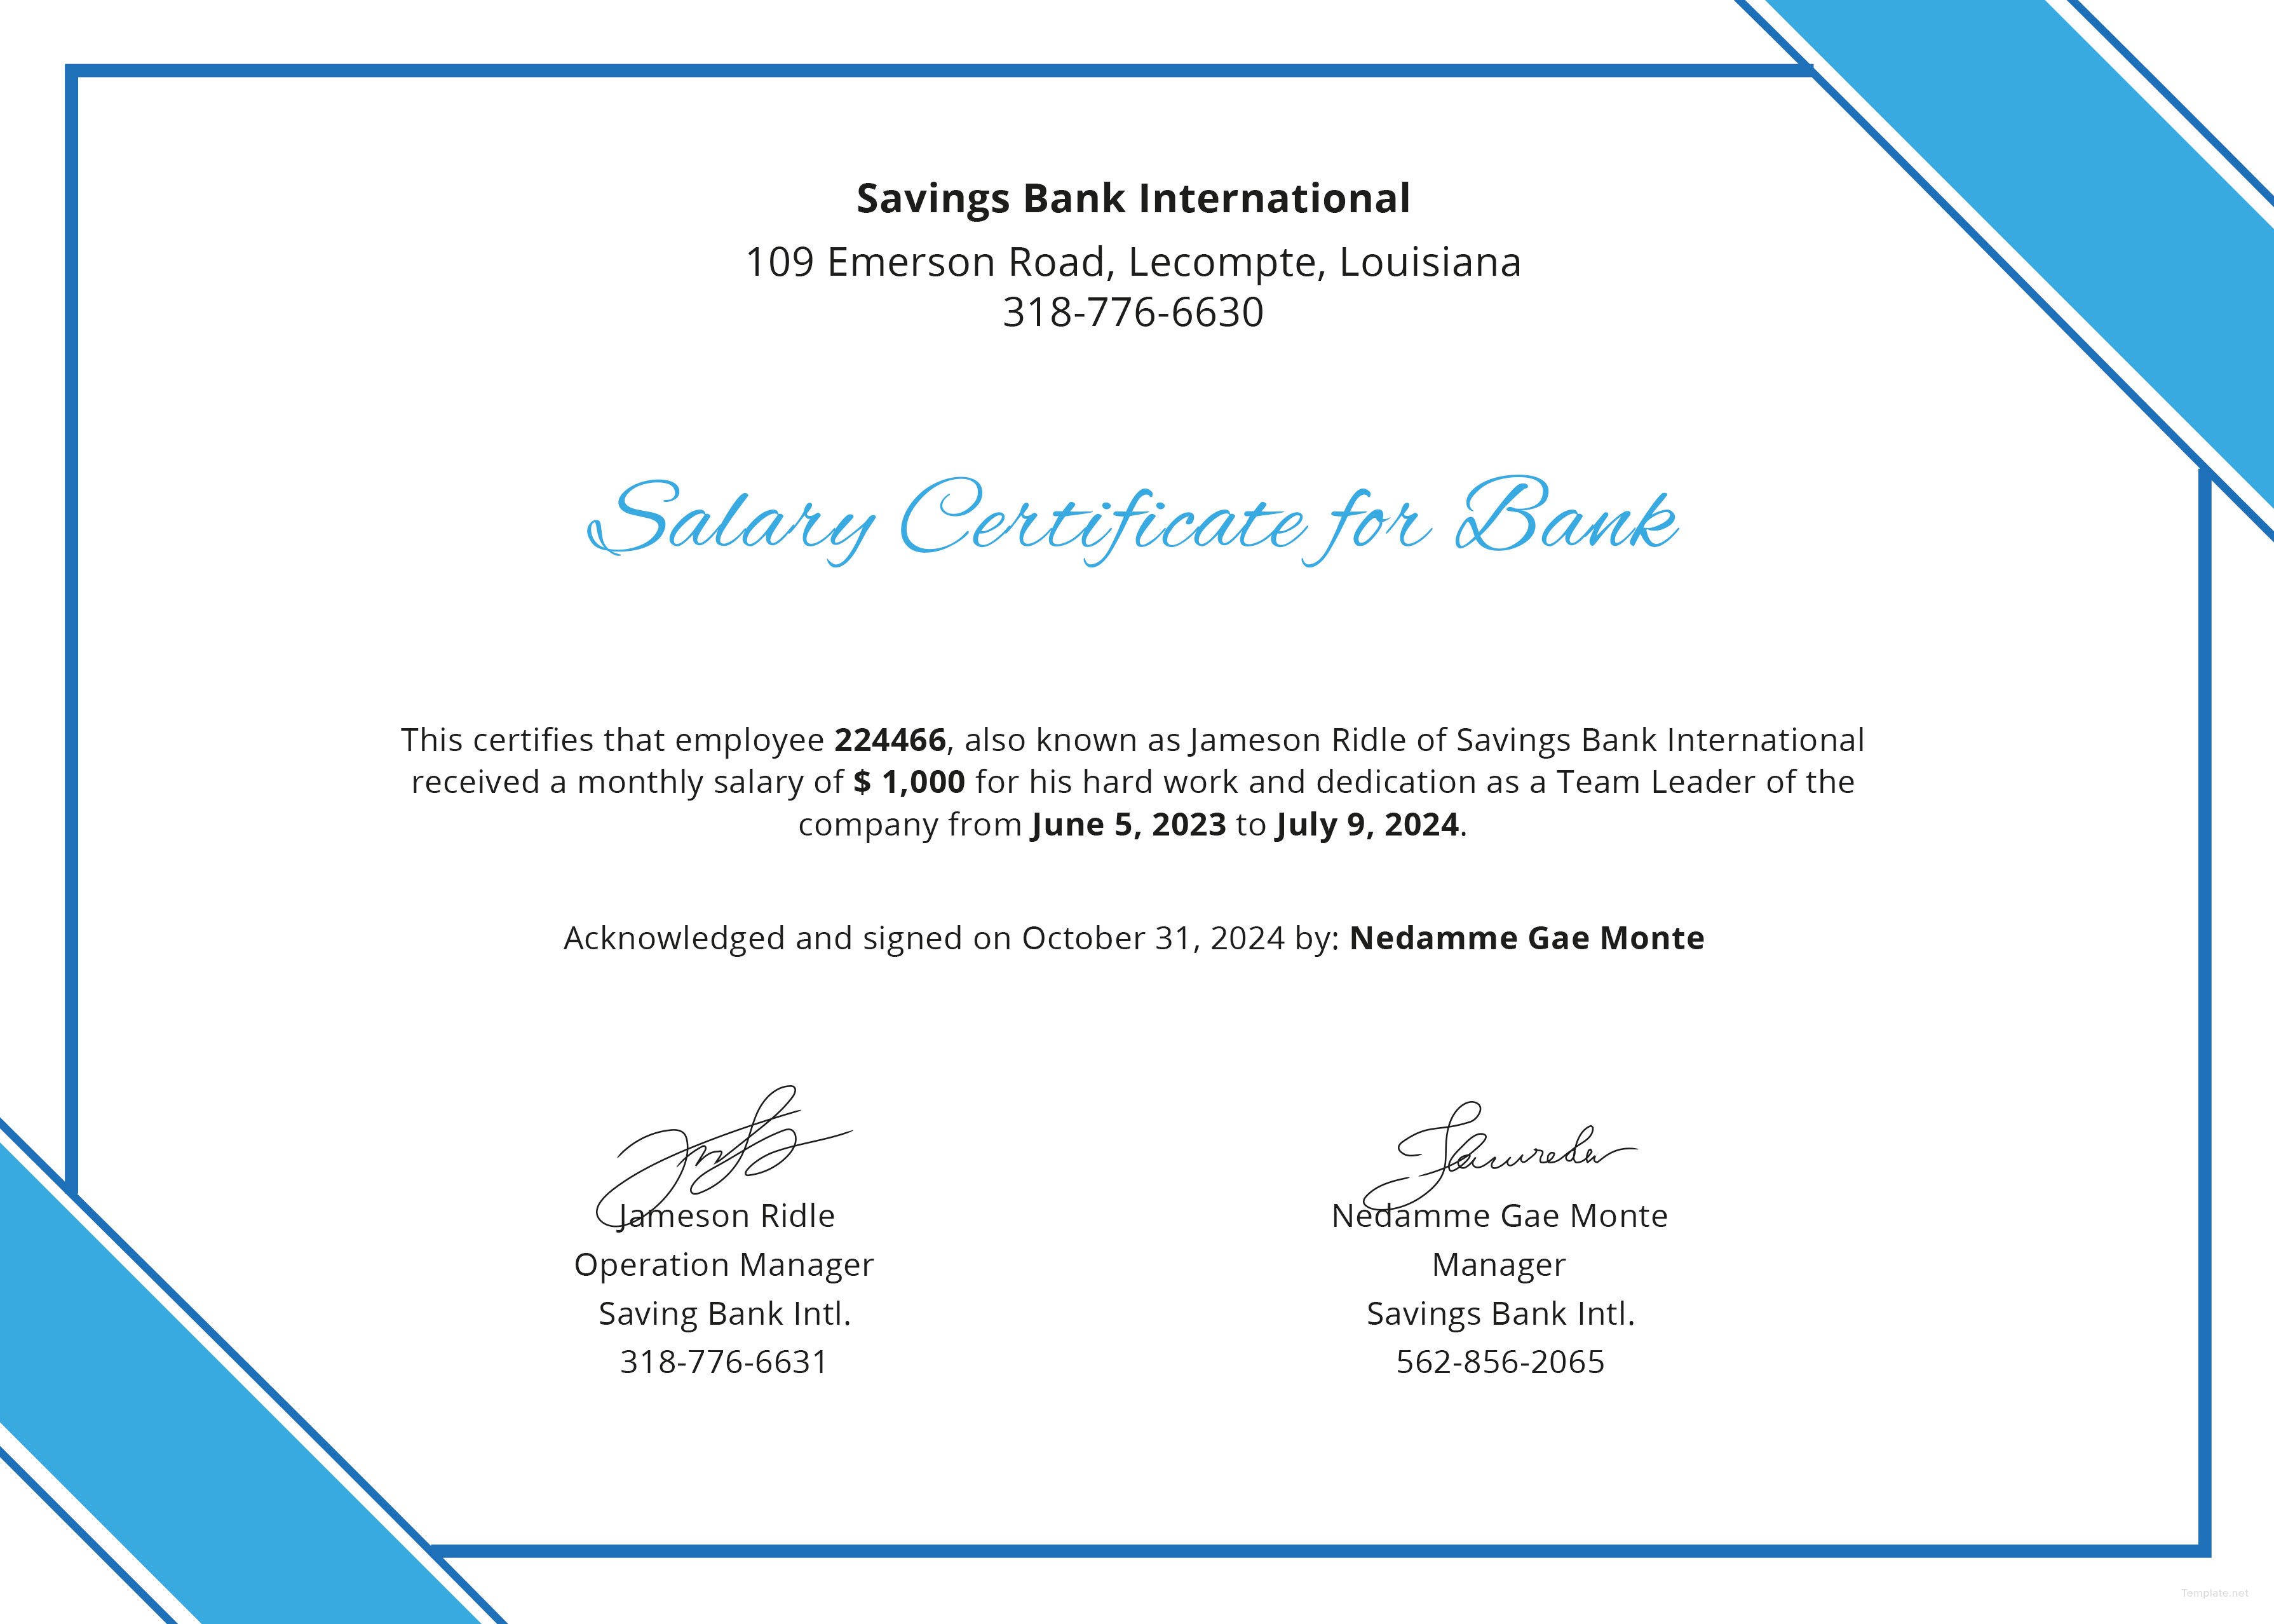 Salary Certificate for Bank Template in Microsoft Word Microsoft